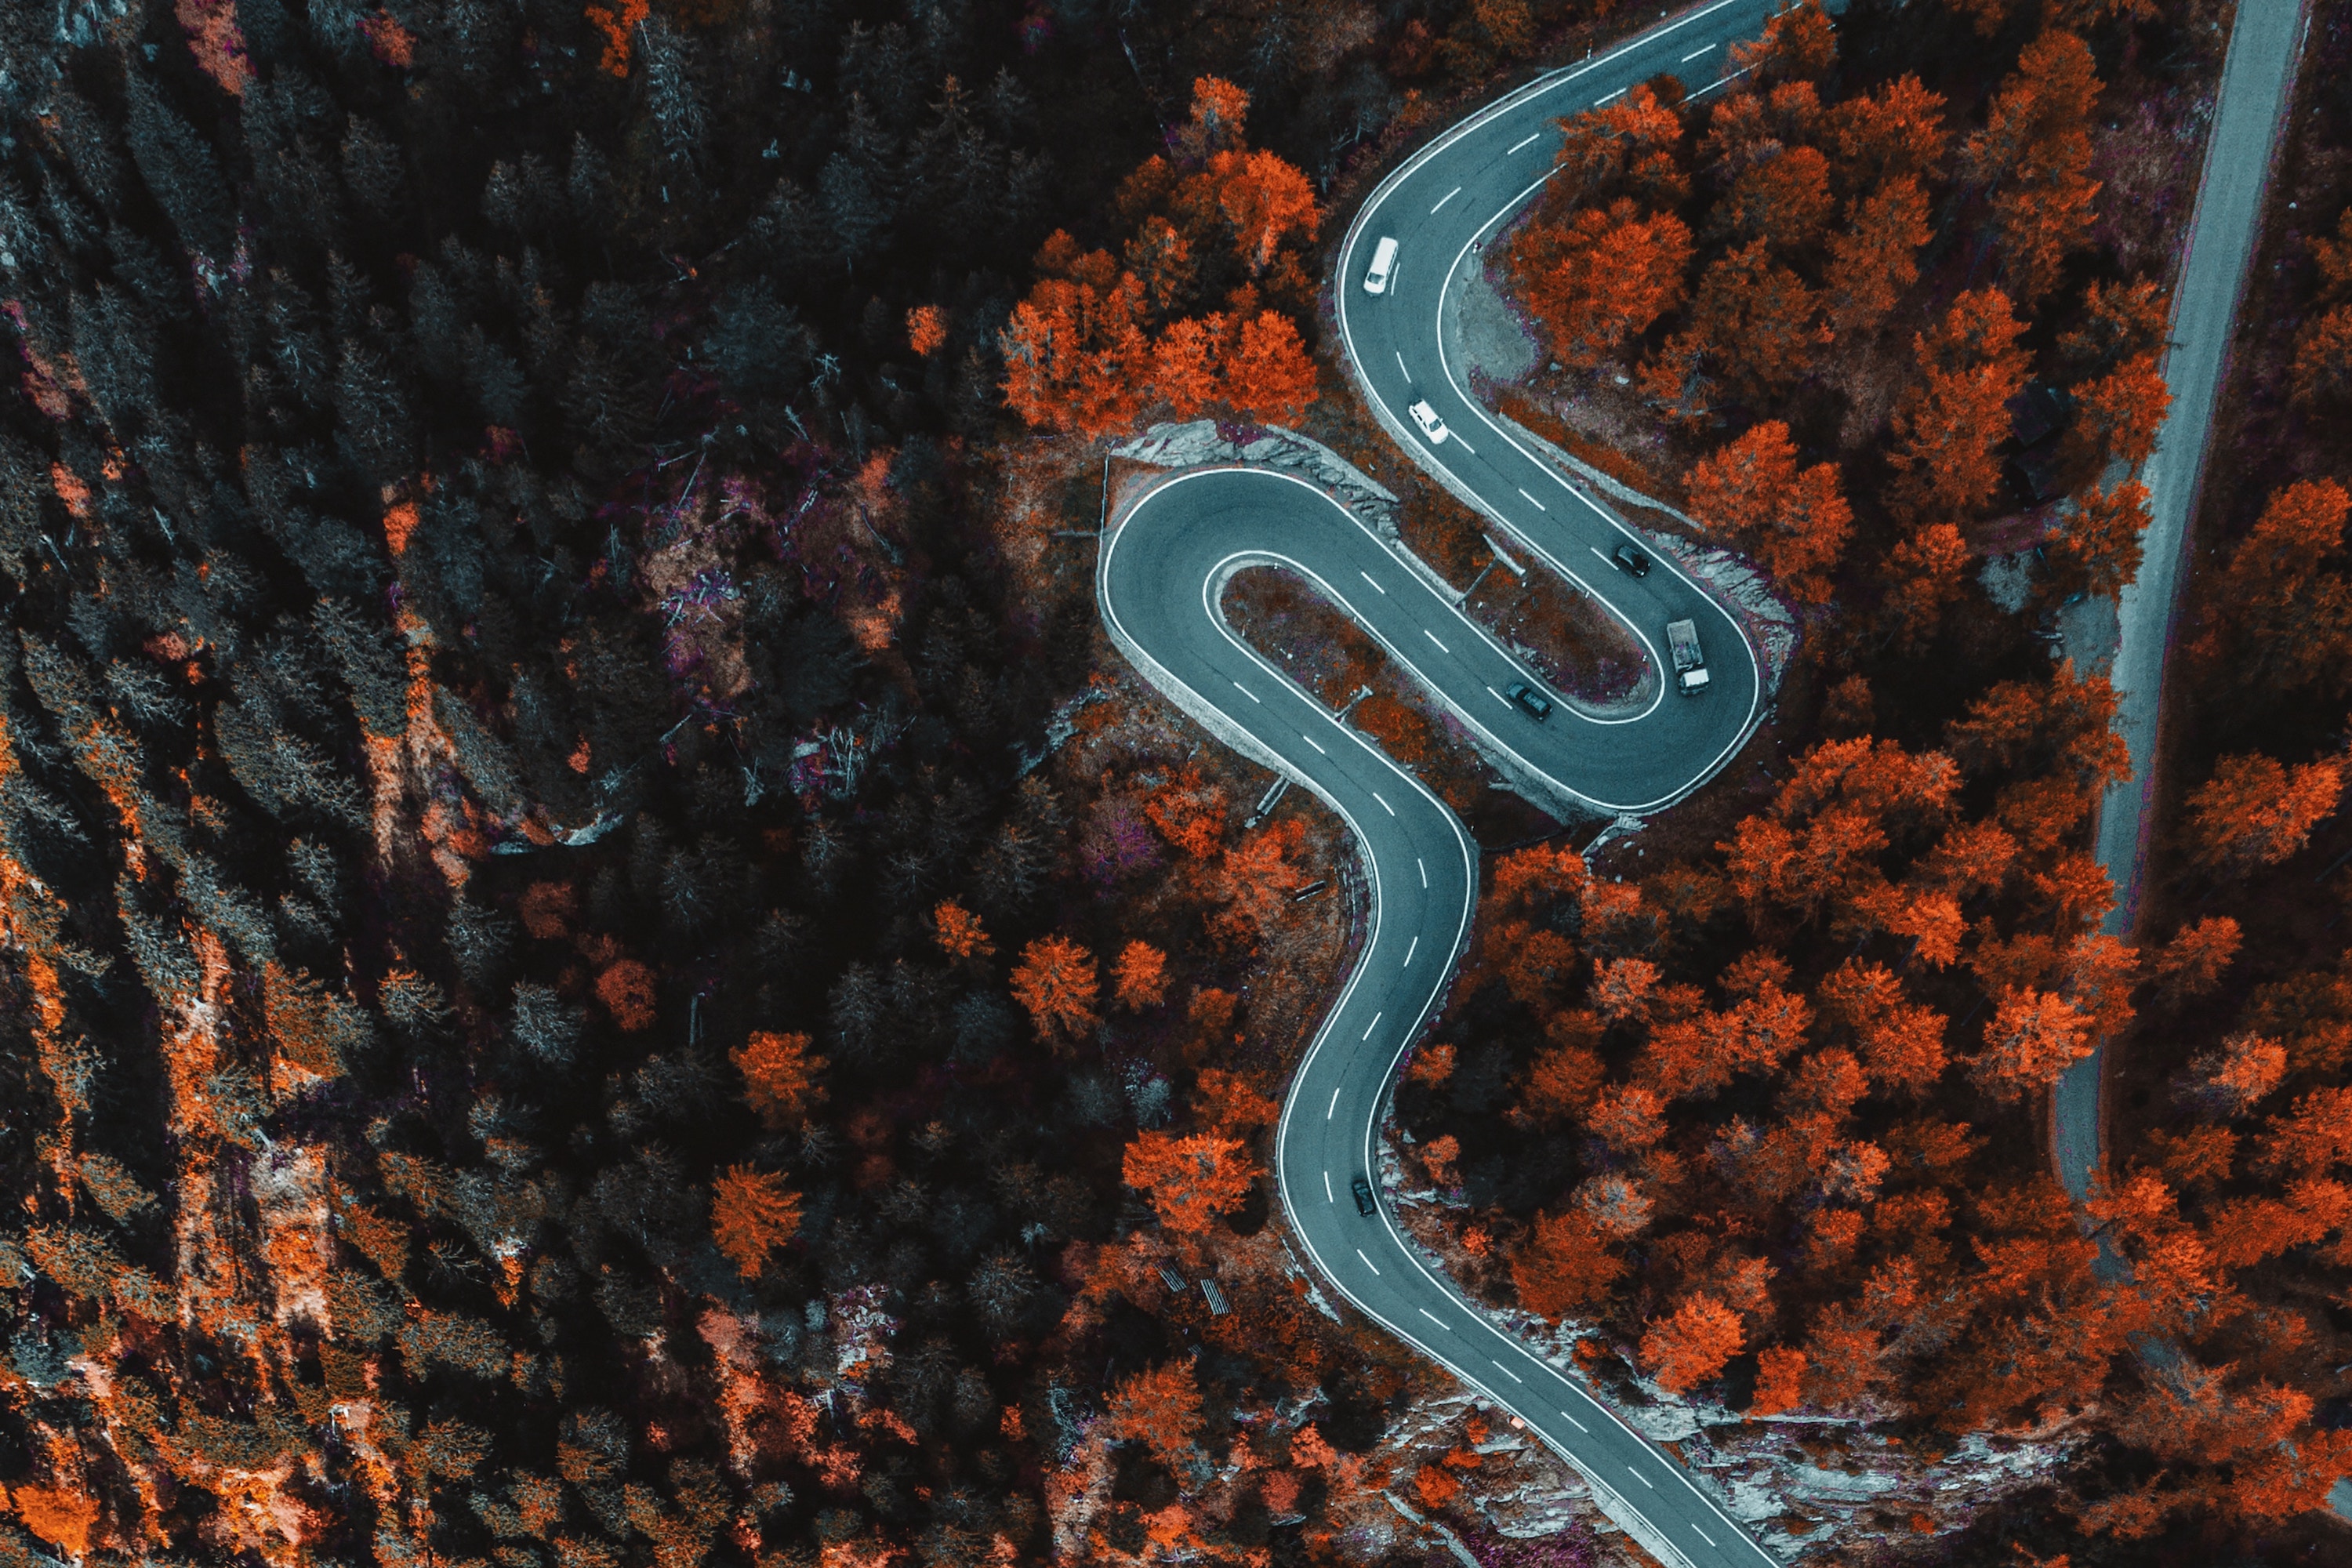 Winding road in the trees